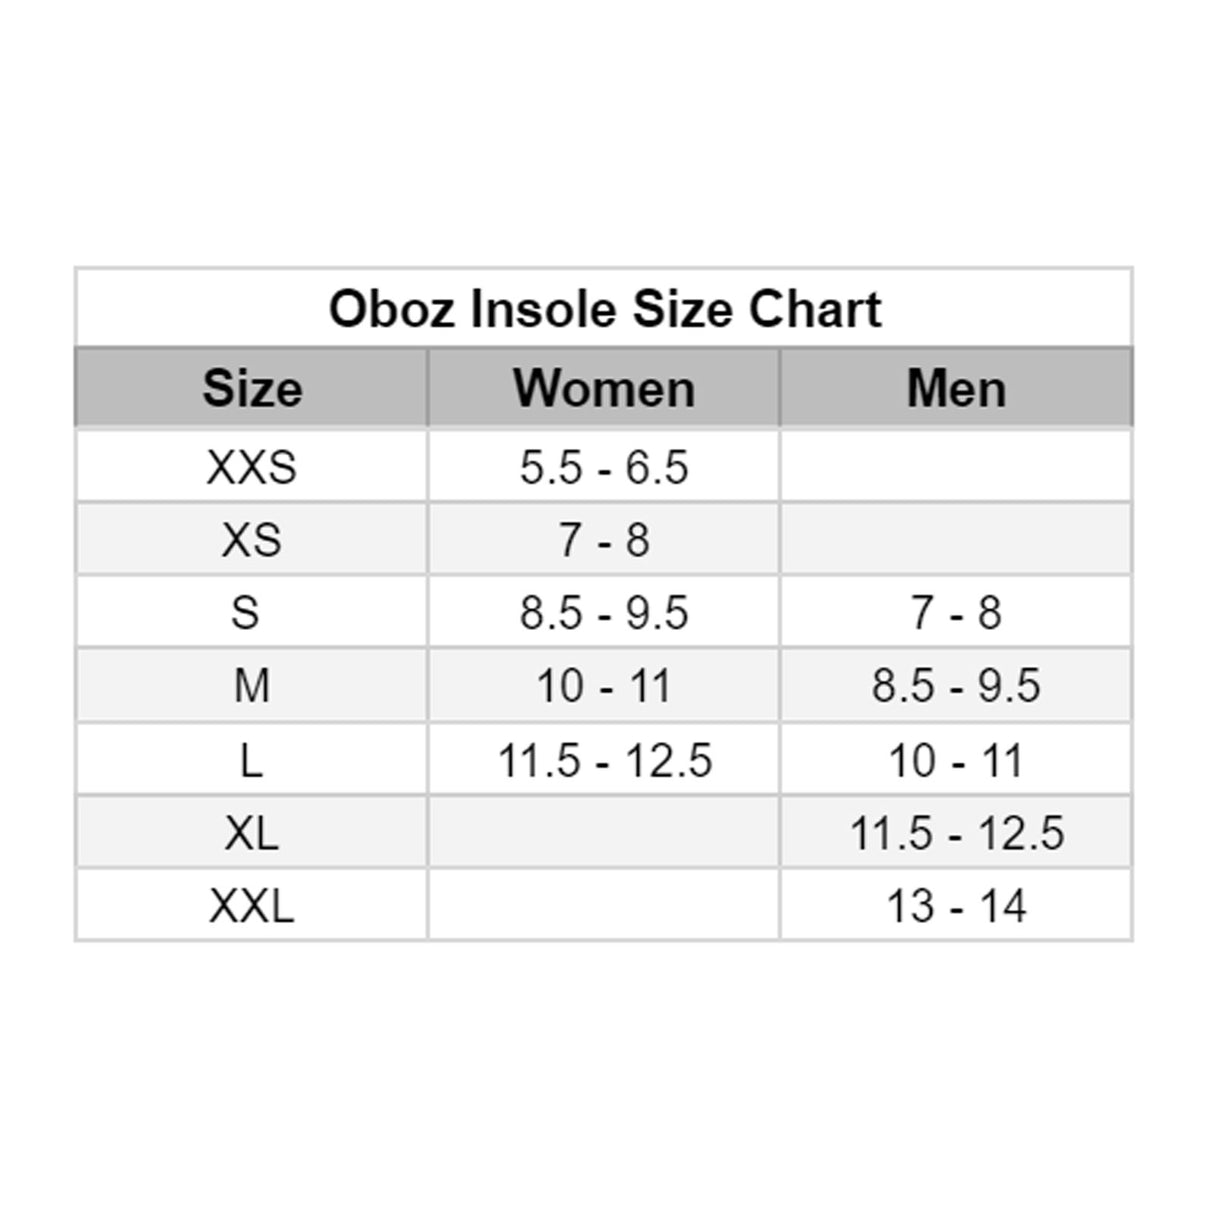 Oboz O FIT Insole Plus Medium Arch Thermal Insole (Unisex) - Grey Accessories - Orthotics/Insoles - Full Length - The Heel Shoe Fitters